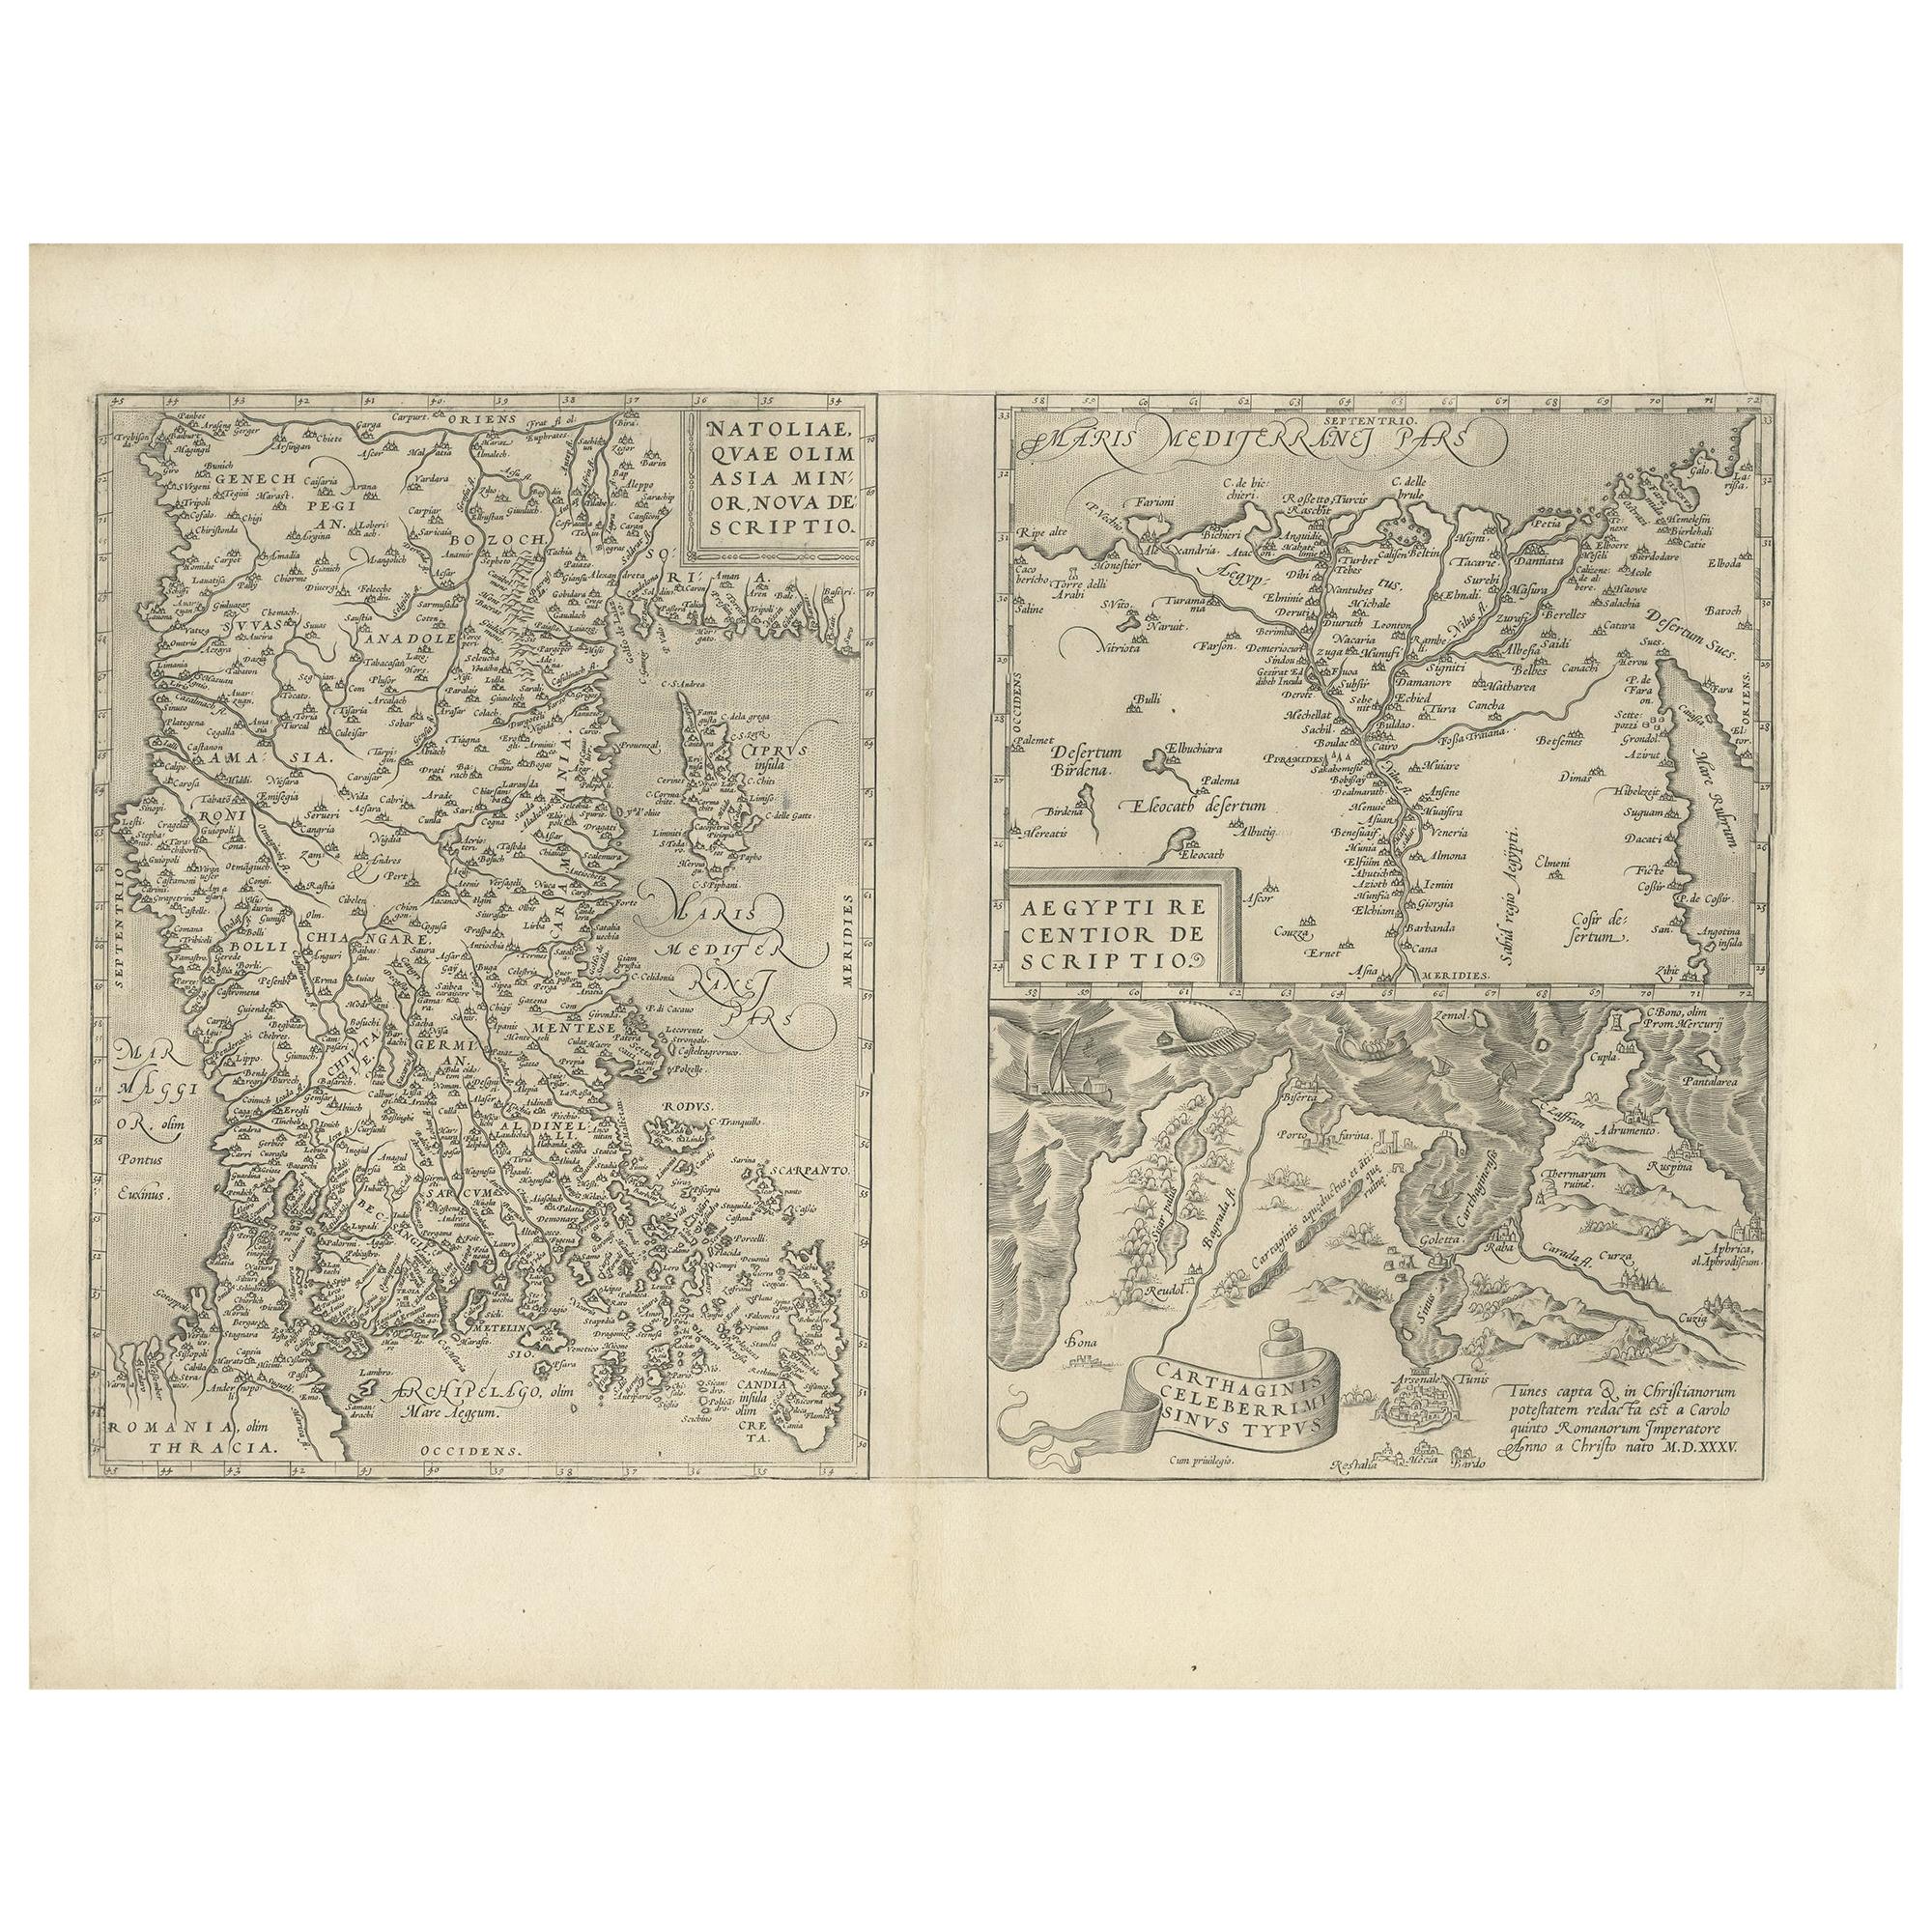 Antique Map of Asia Minor, Region of the Nile and Region of the City of Carthage